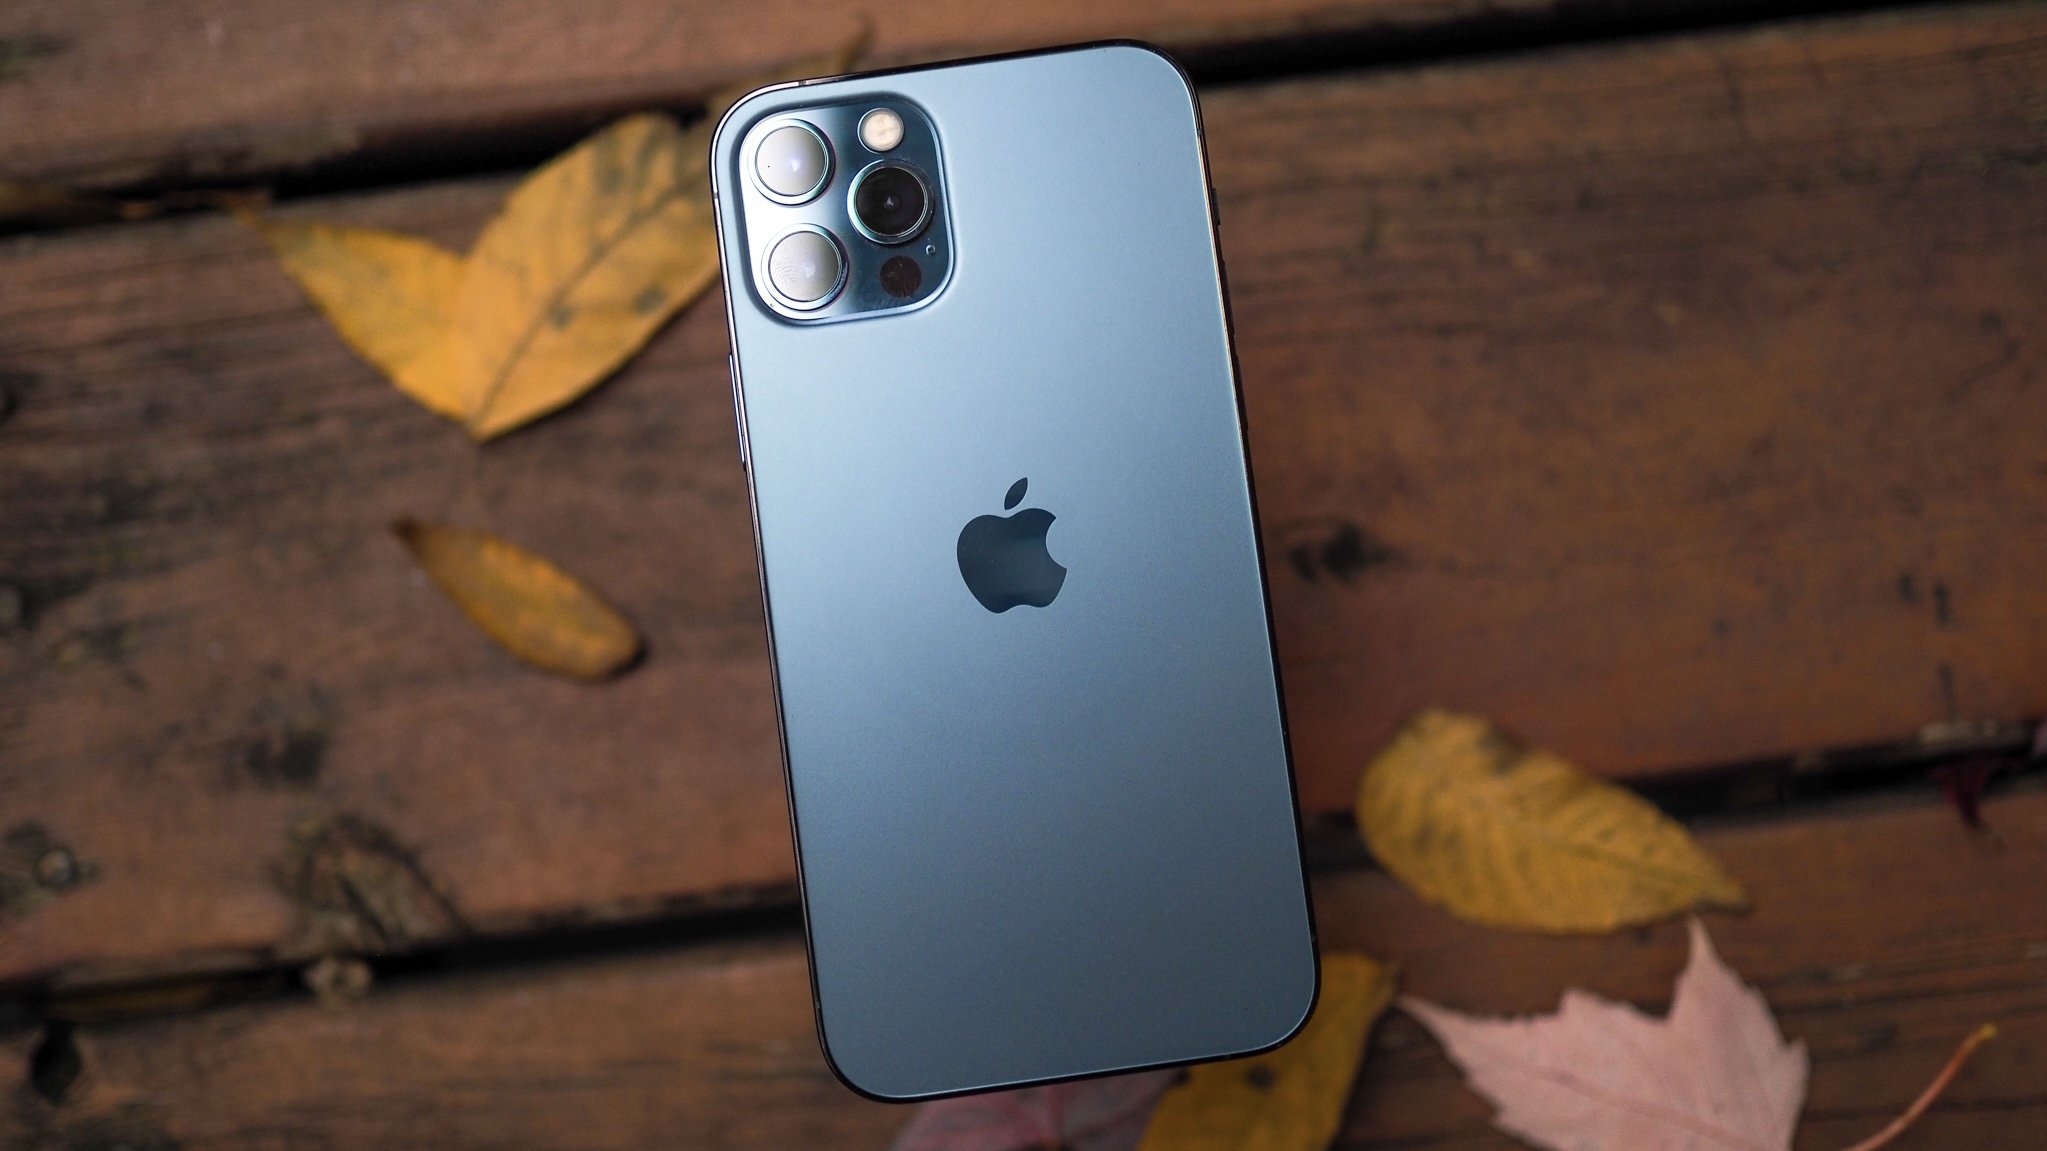 Iphone 12 Pro Review 18 Resized